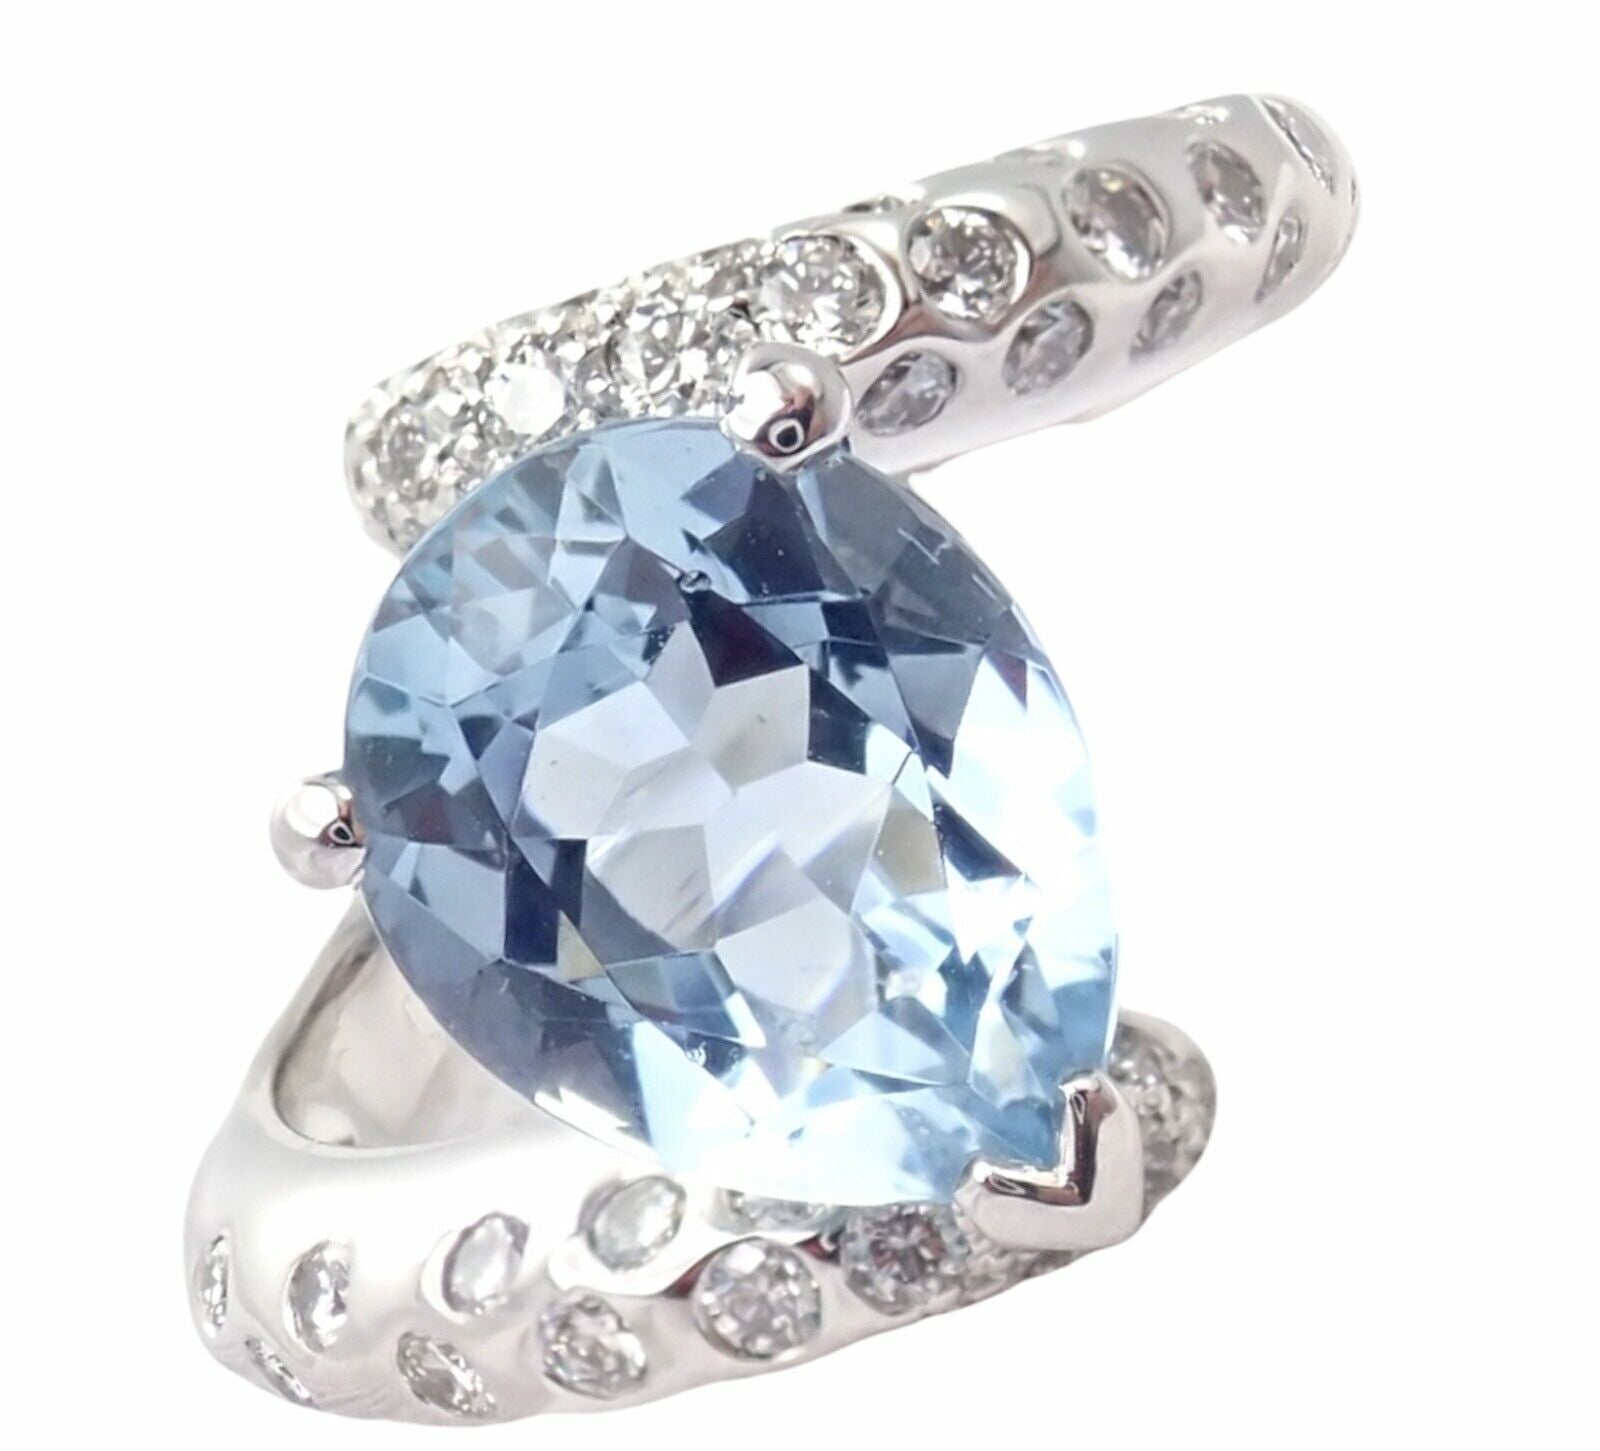 CHANEL Jewelry & Watches:Fine Jewelry:Rings Authentic! Chanel Comete Star 18k White Gold Diamond 2.25ct Aquamarine Ring